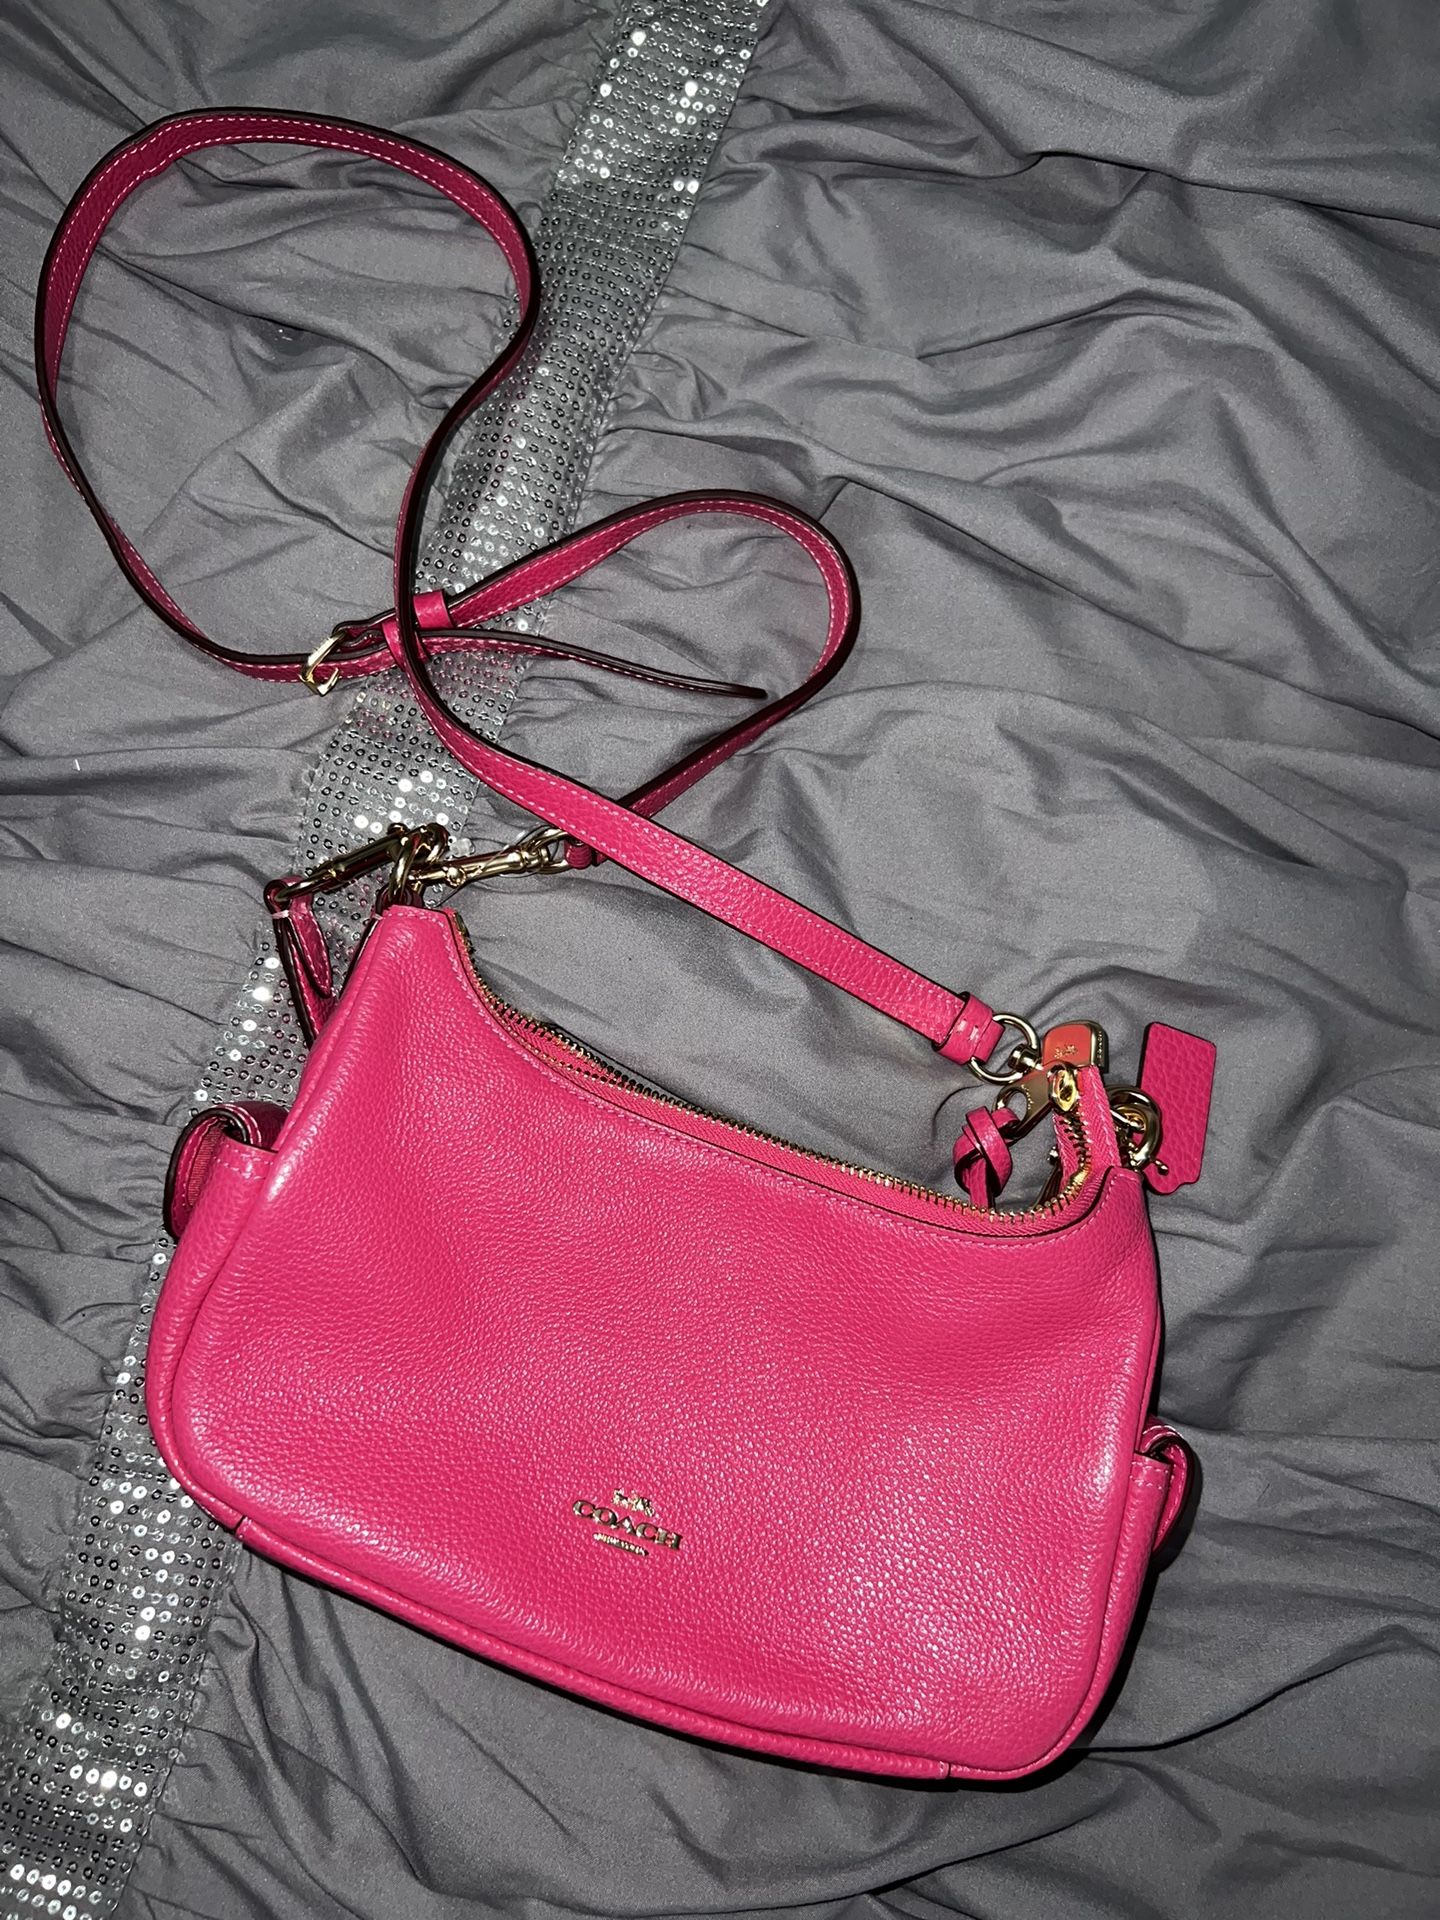 Brand new Coach Pink Pennie Shoulder Bag Purse for Sale in San